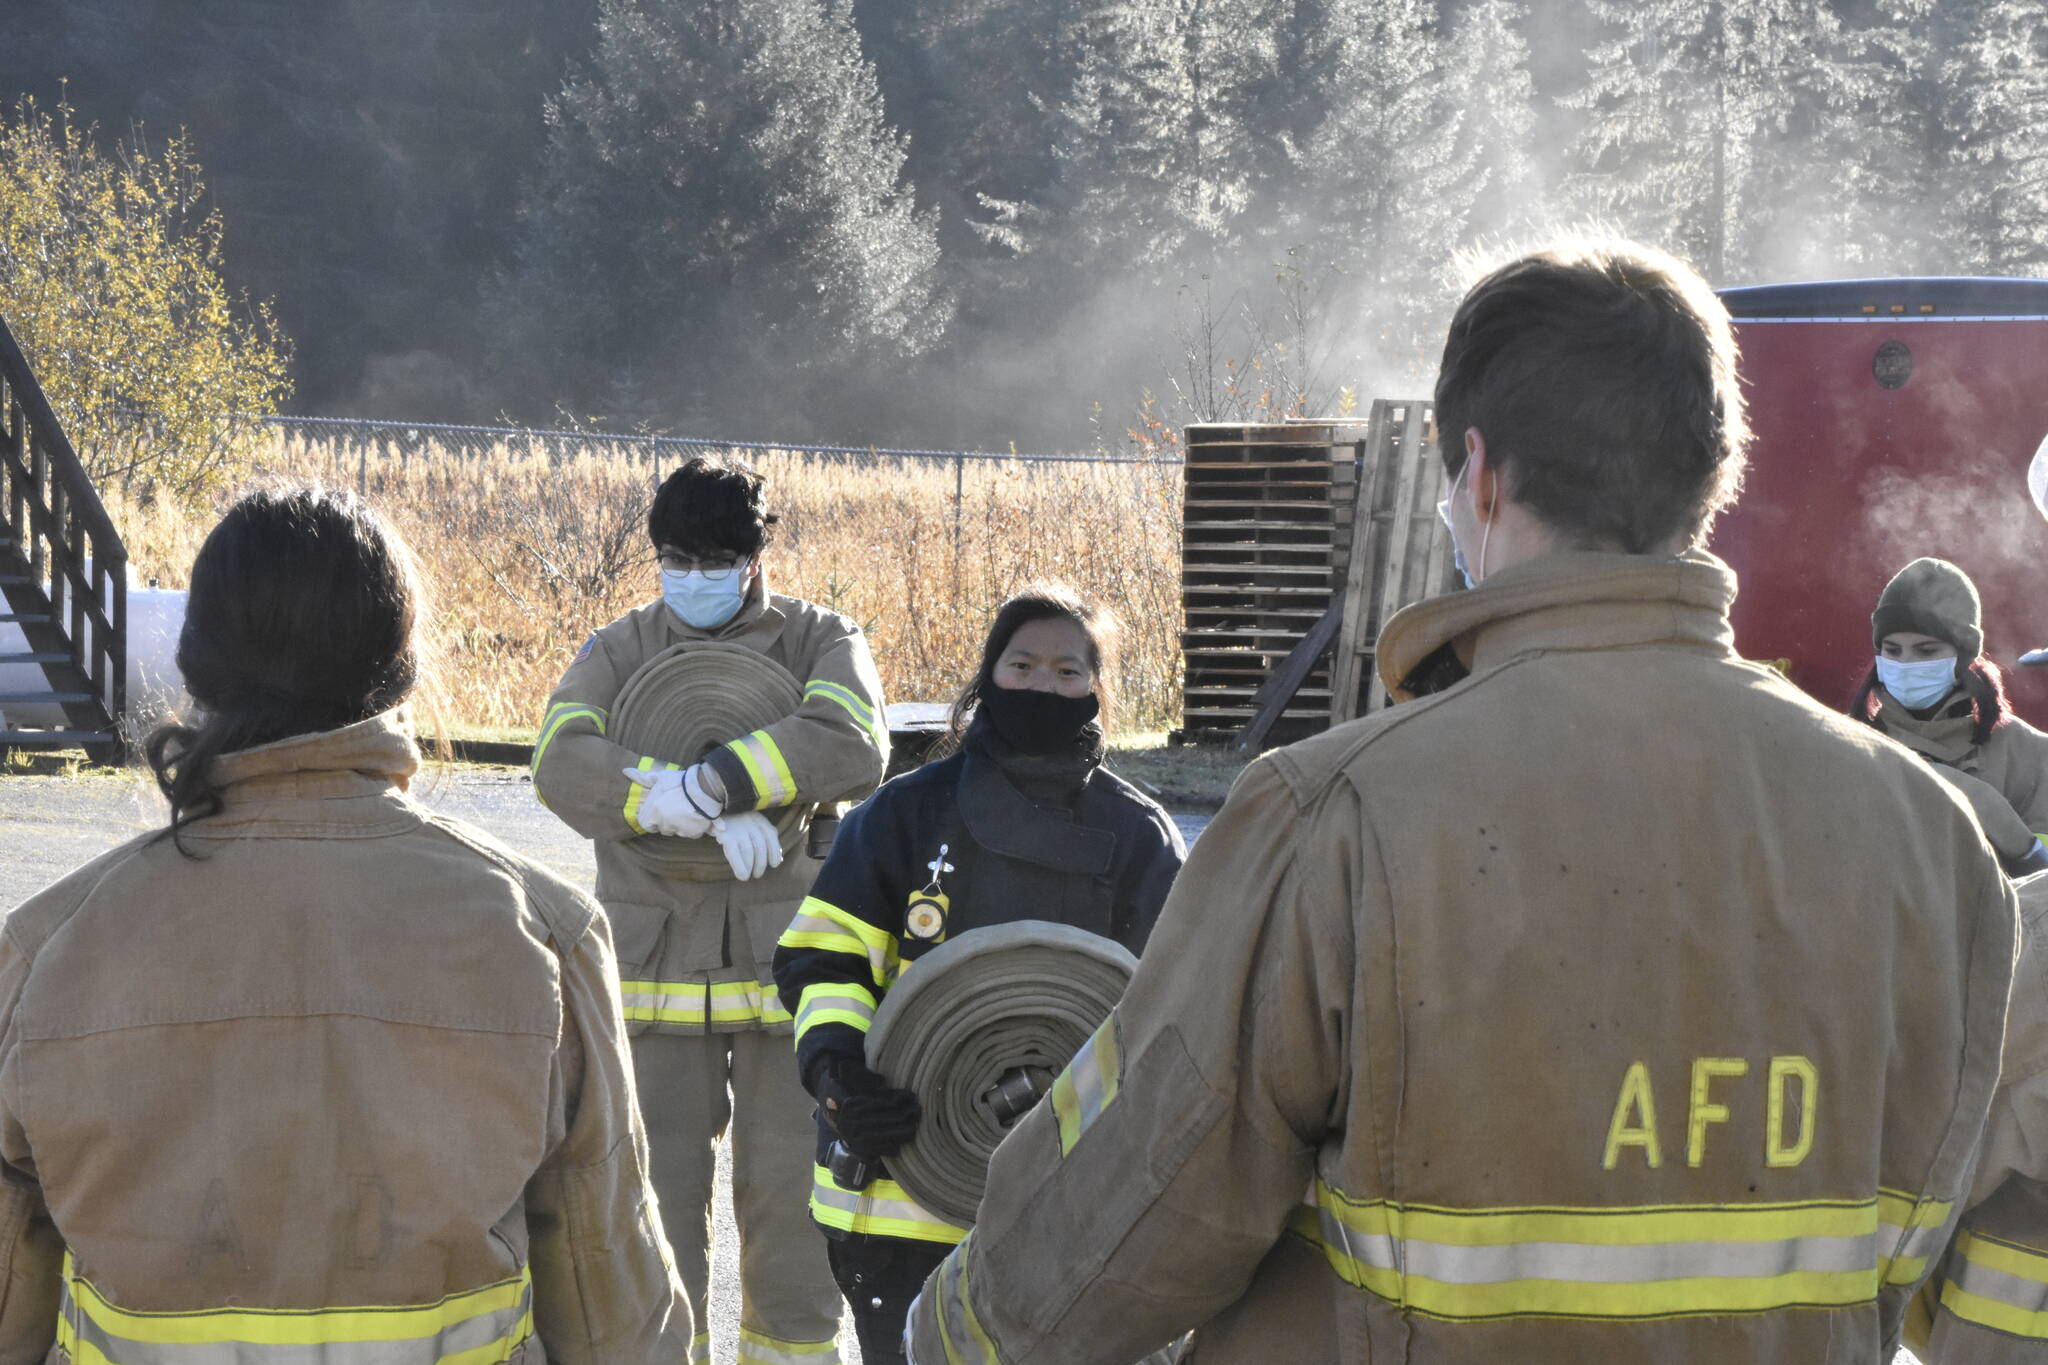 Capital City Fire/Rescue’s Cadet Program is in session once again, meeting at Hagevig Regional Fire Training Center the on the first three Saturdays of each month for high schoolers to learn more about the job. (Peter Segall / Juneau Empire)